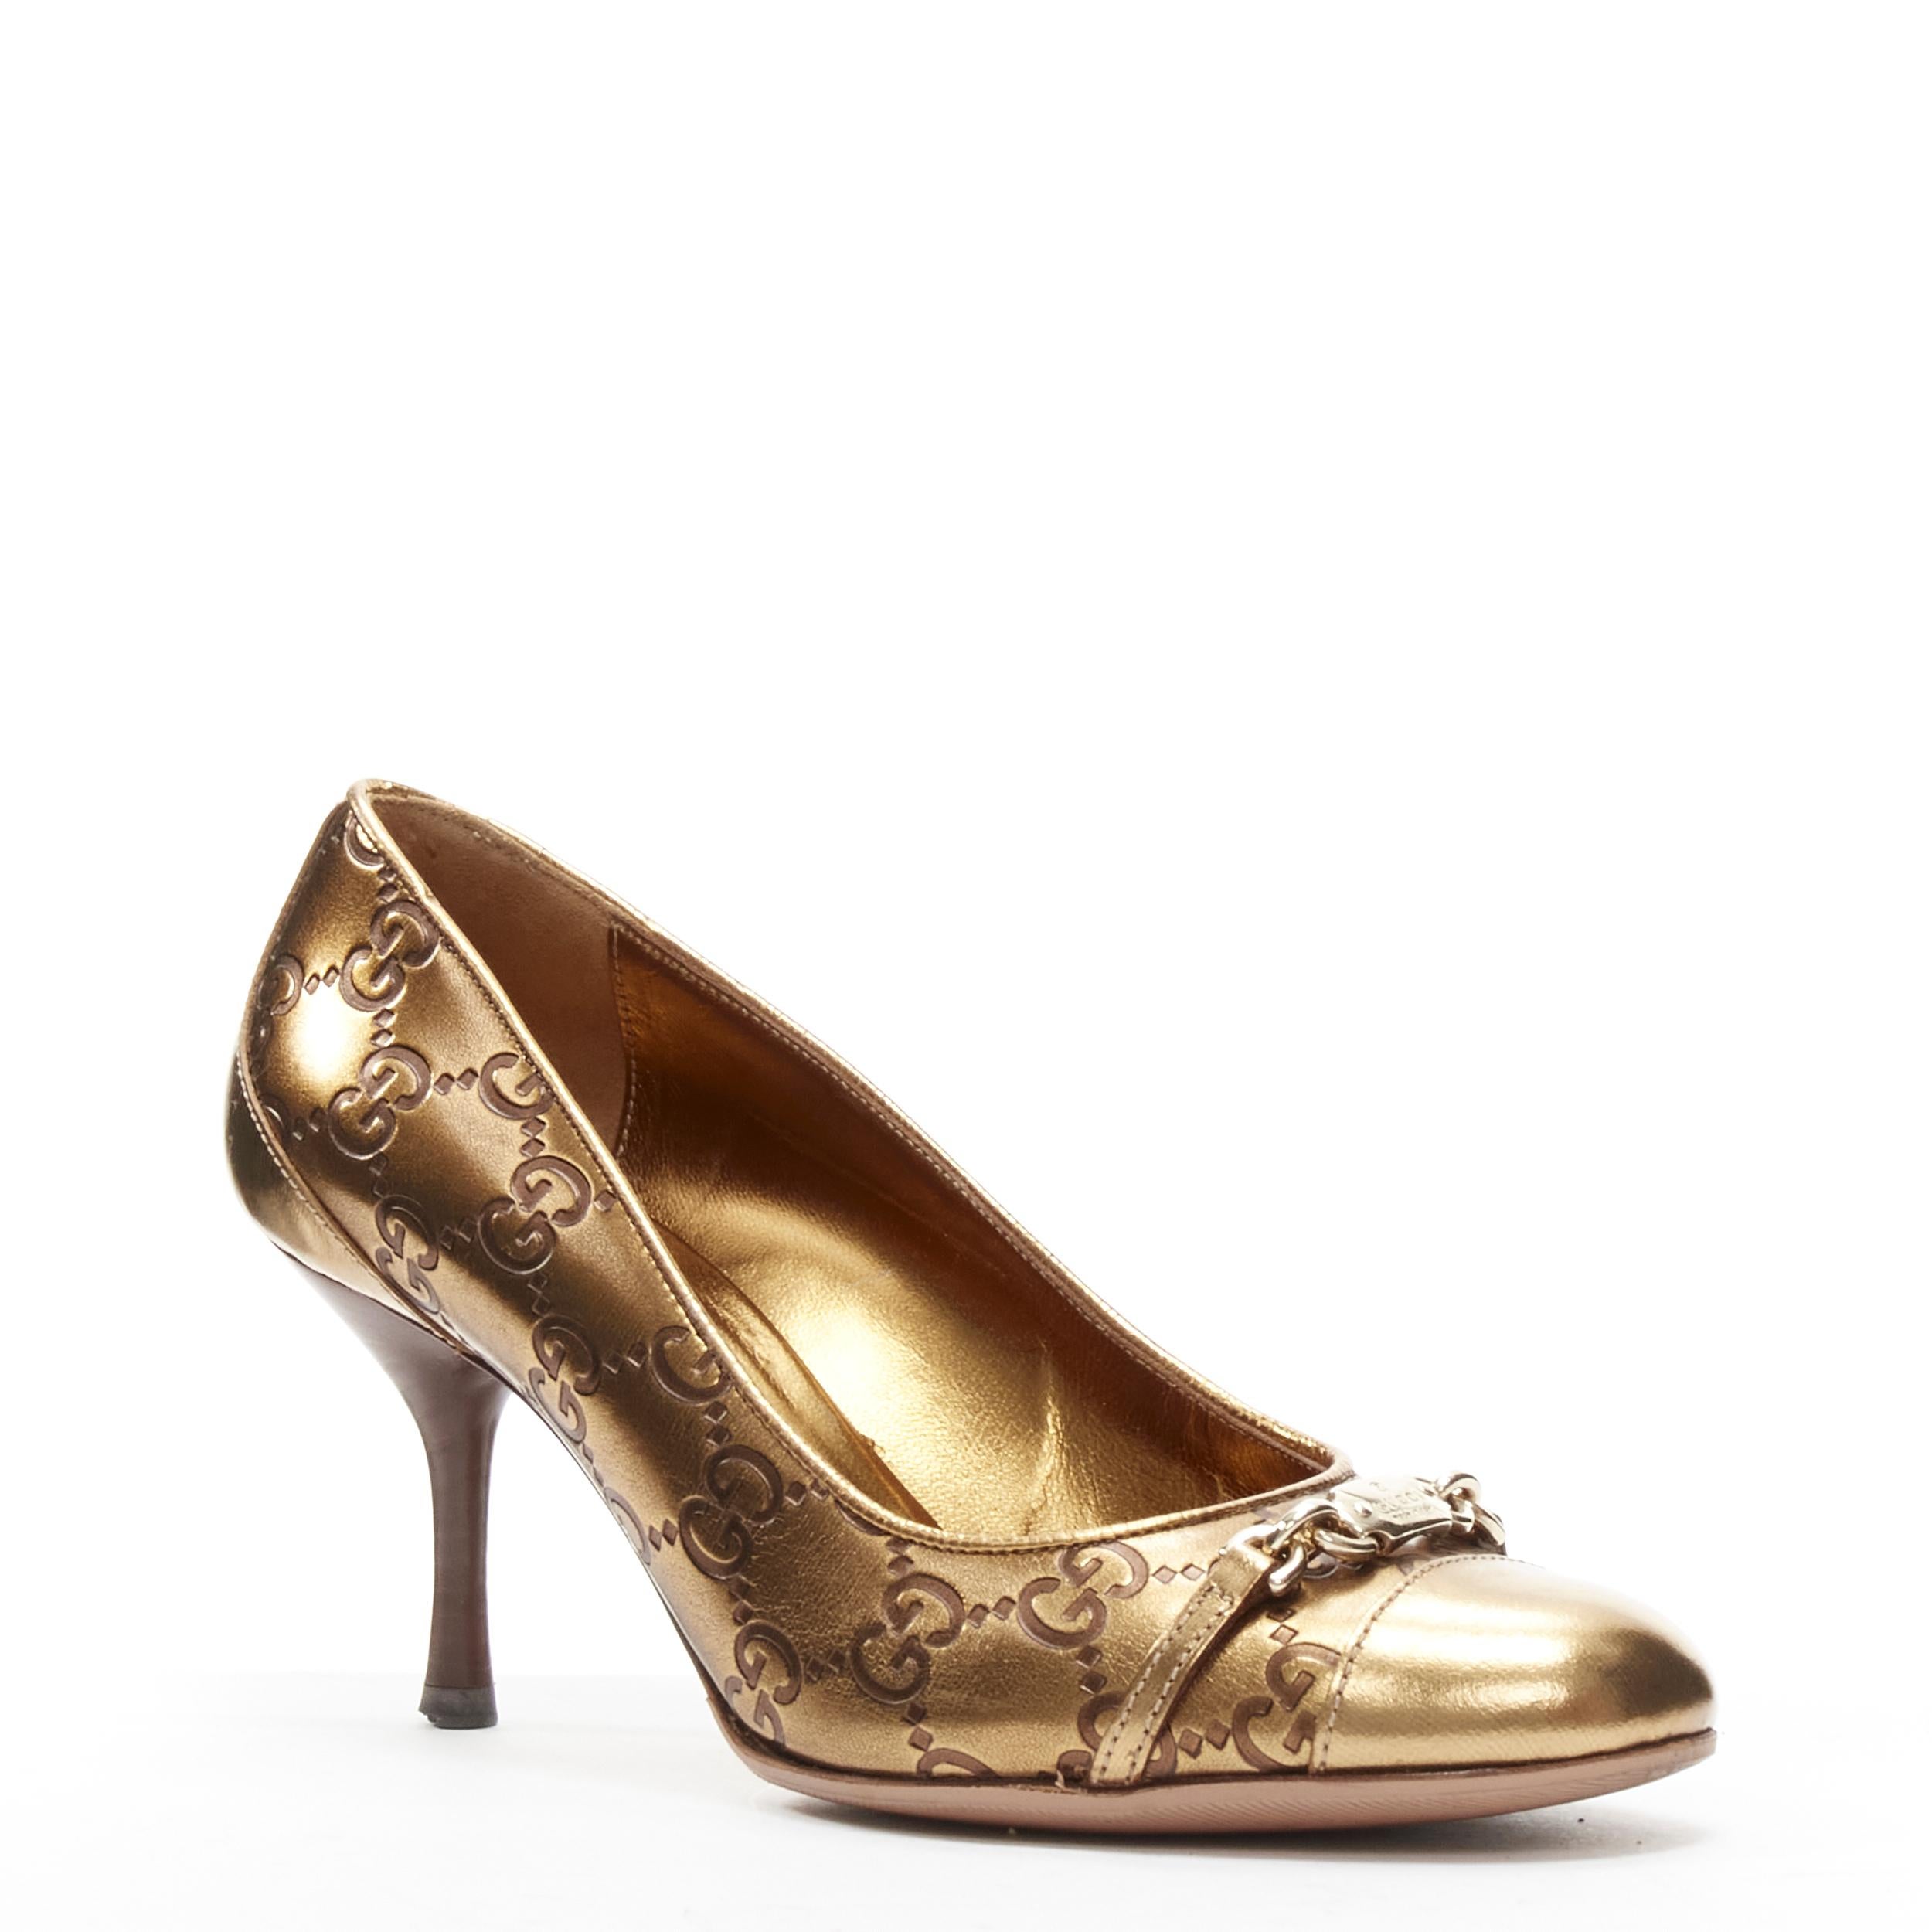 GUCCI Vintage metallic gold GG monogram gold chain charm mid heel pump EU36 C
Brand: Gucci
Model: 146798
Material: Calfskin Leather
Color: Gold
Pattern: Solid
Extra Detail: Gold-tone ID plate chain detailing at toe. Stacked wooden heel.
Made in: